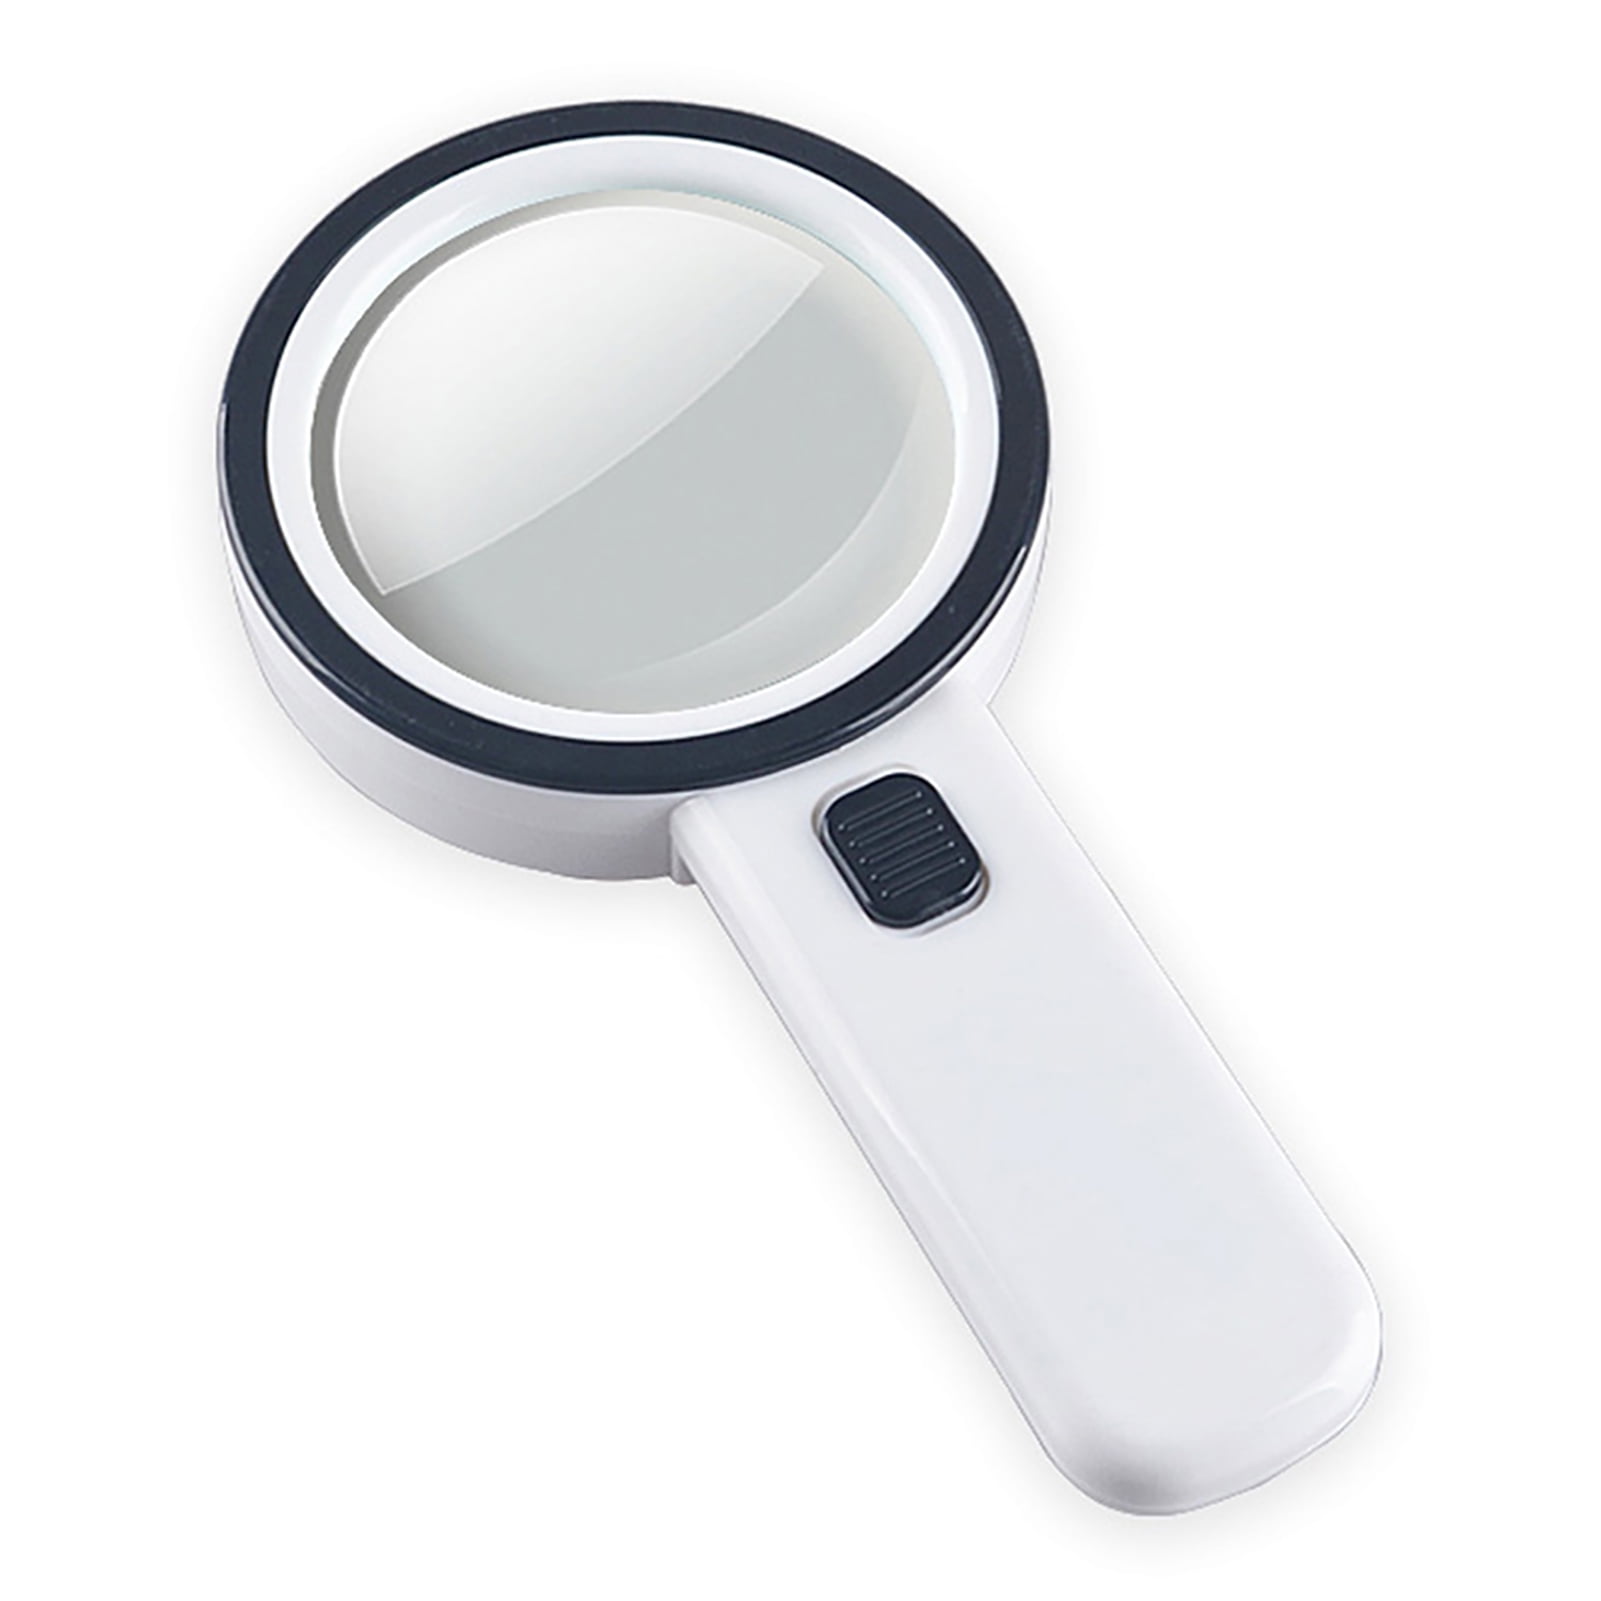 Inspection Hobbies and Crafts Gift Newspapers Lightweight Handheld Magnifying Glass for Reading Maps Magnifying Glass with LED Light Illuminated Magnifier 6X Magnification 